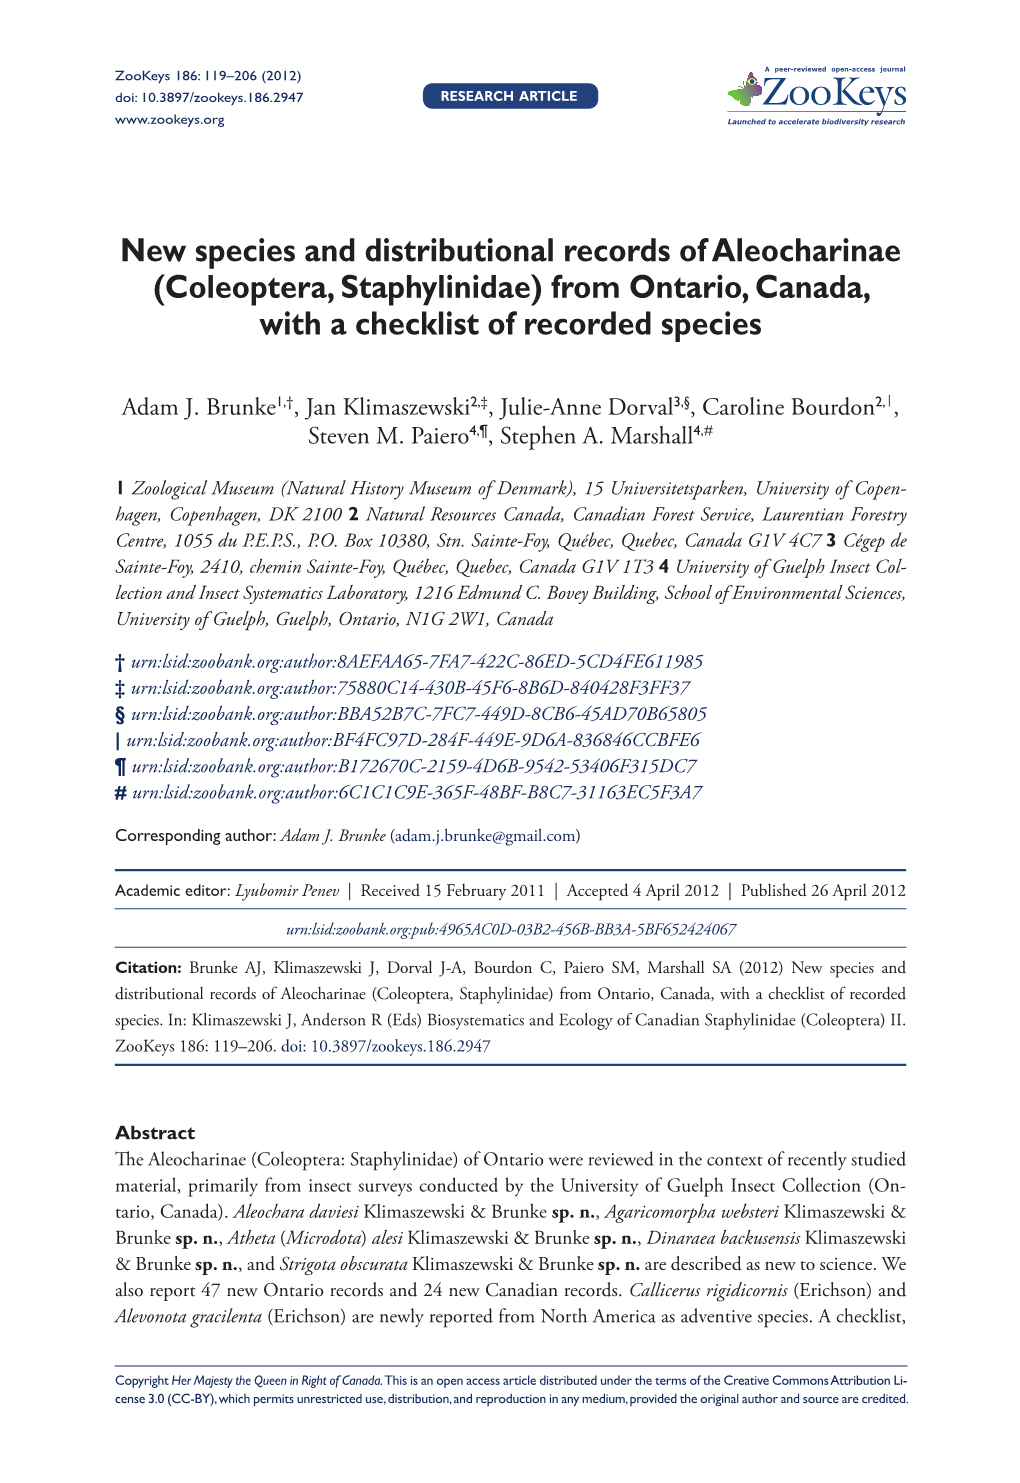 New Species and Distributional Records of Aleocharinae (Coleoptera, Staphylinidae) from Ontario, Canada, with a Checklist of Recorded Species